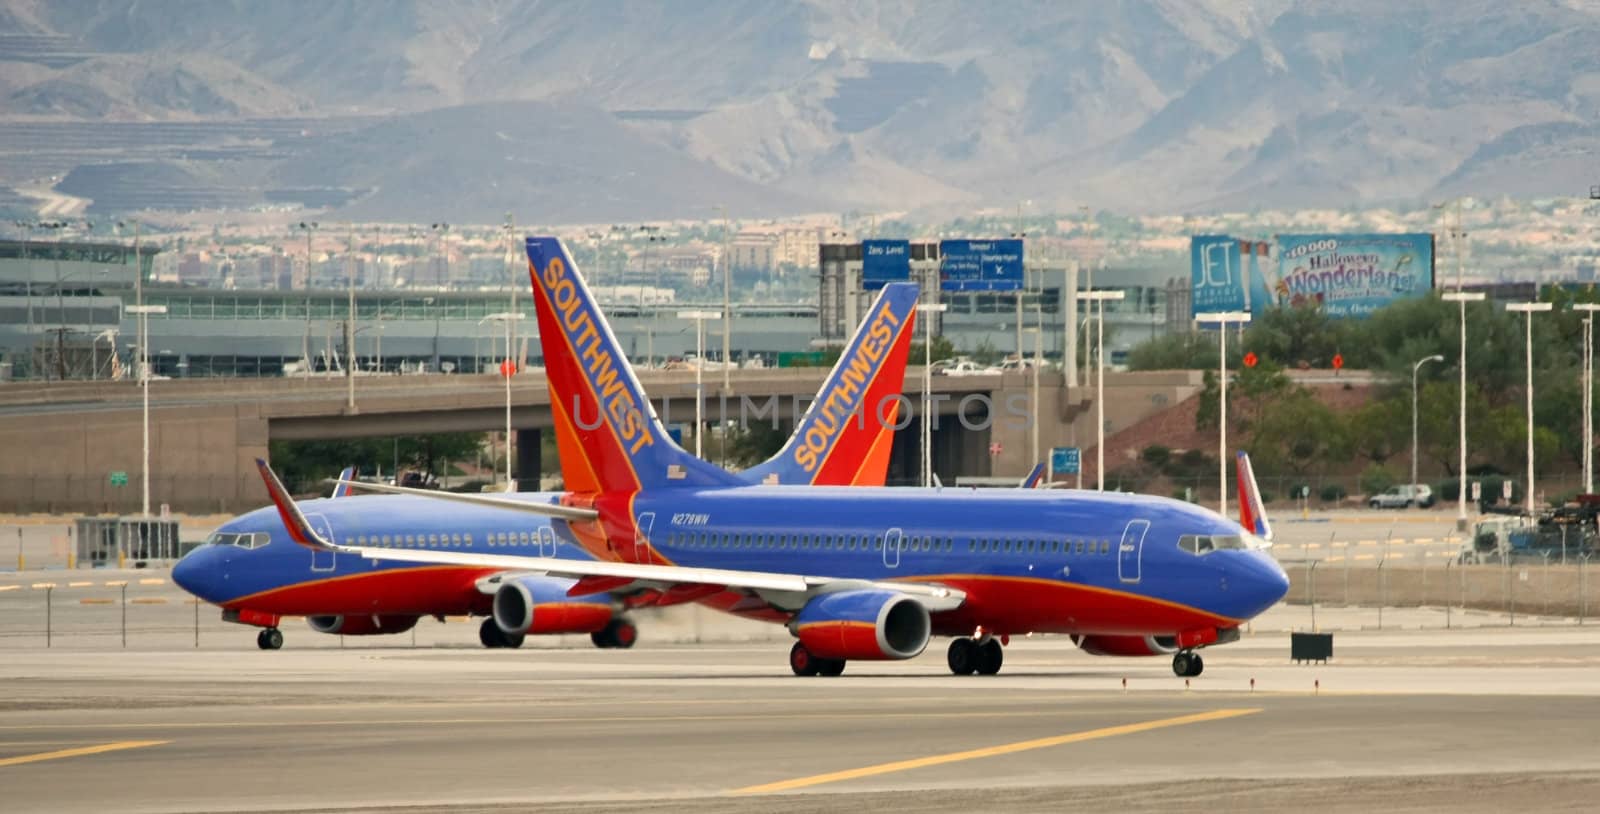 LAS VEGAS - OCT 31: Taken in Las Vegas, Nevada at McCarran Airport on Friday, October, 31, 2008. Two Southwest Airlines pass each other on the tarmac before take off.
